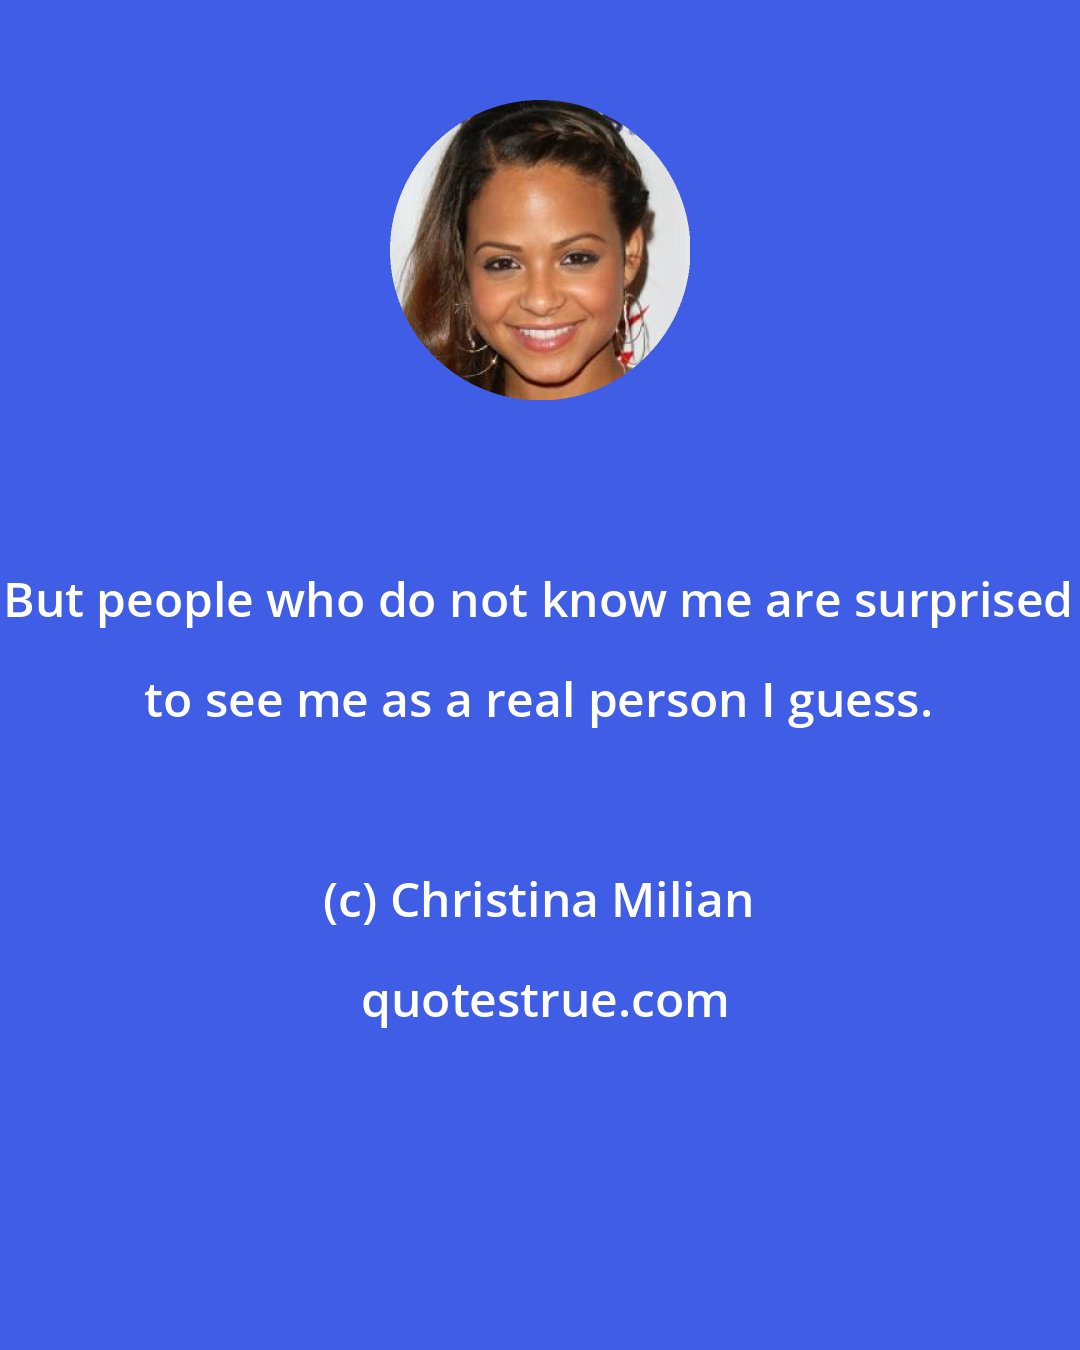 Christina Milian: But people who do not know me are surprised to see me as a real person I guess.